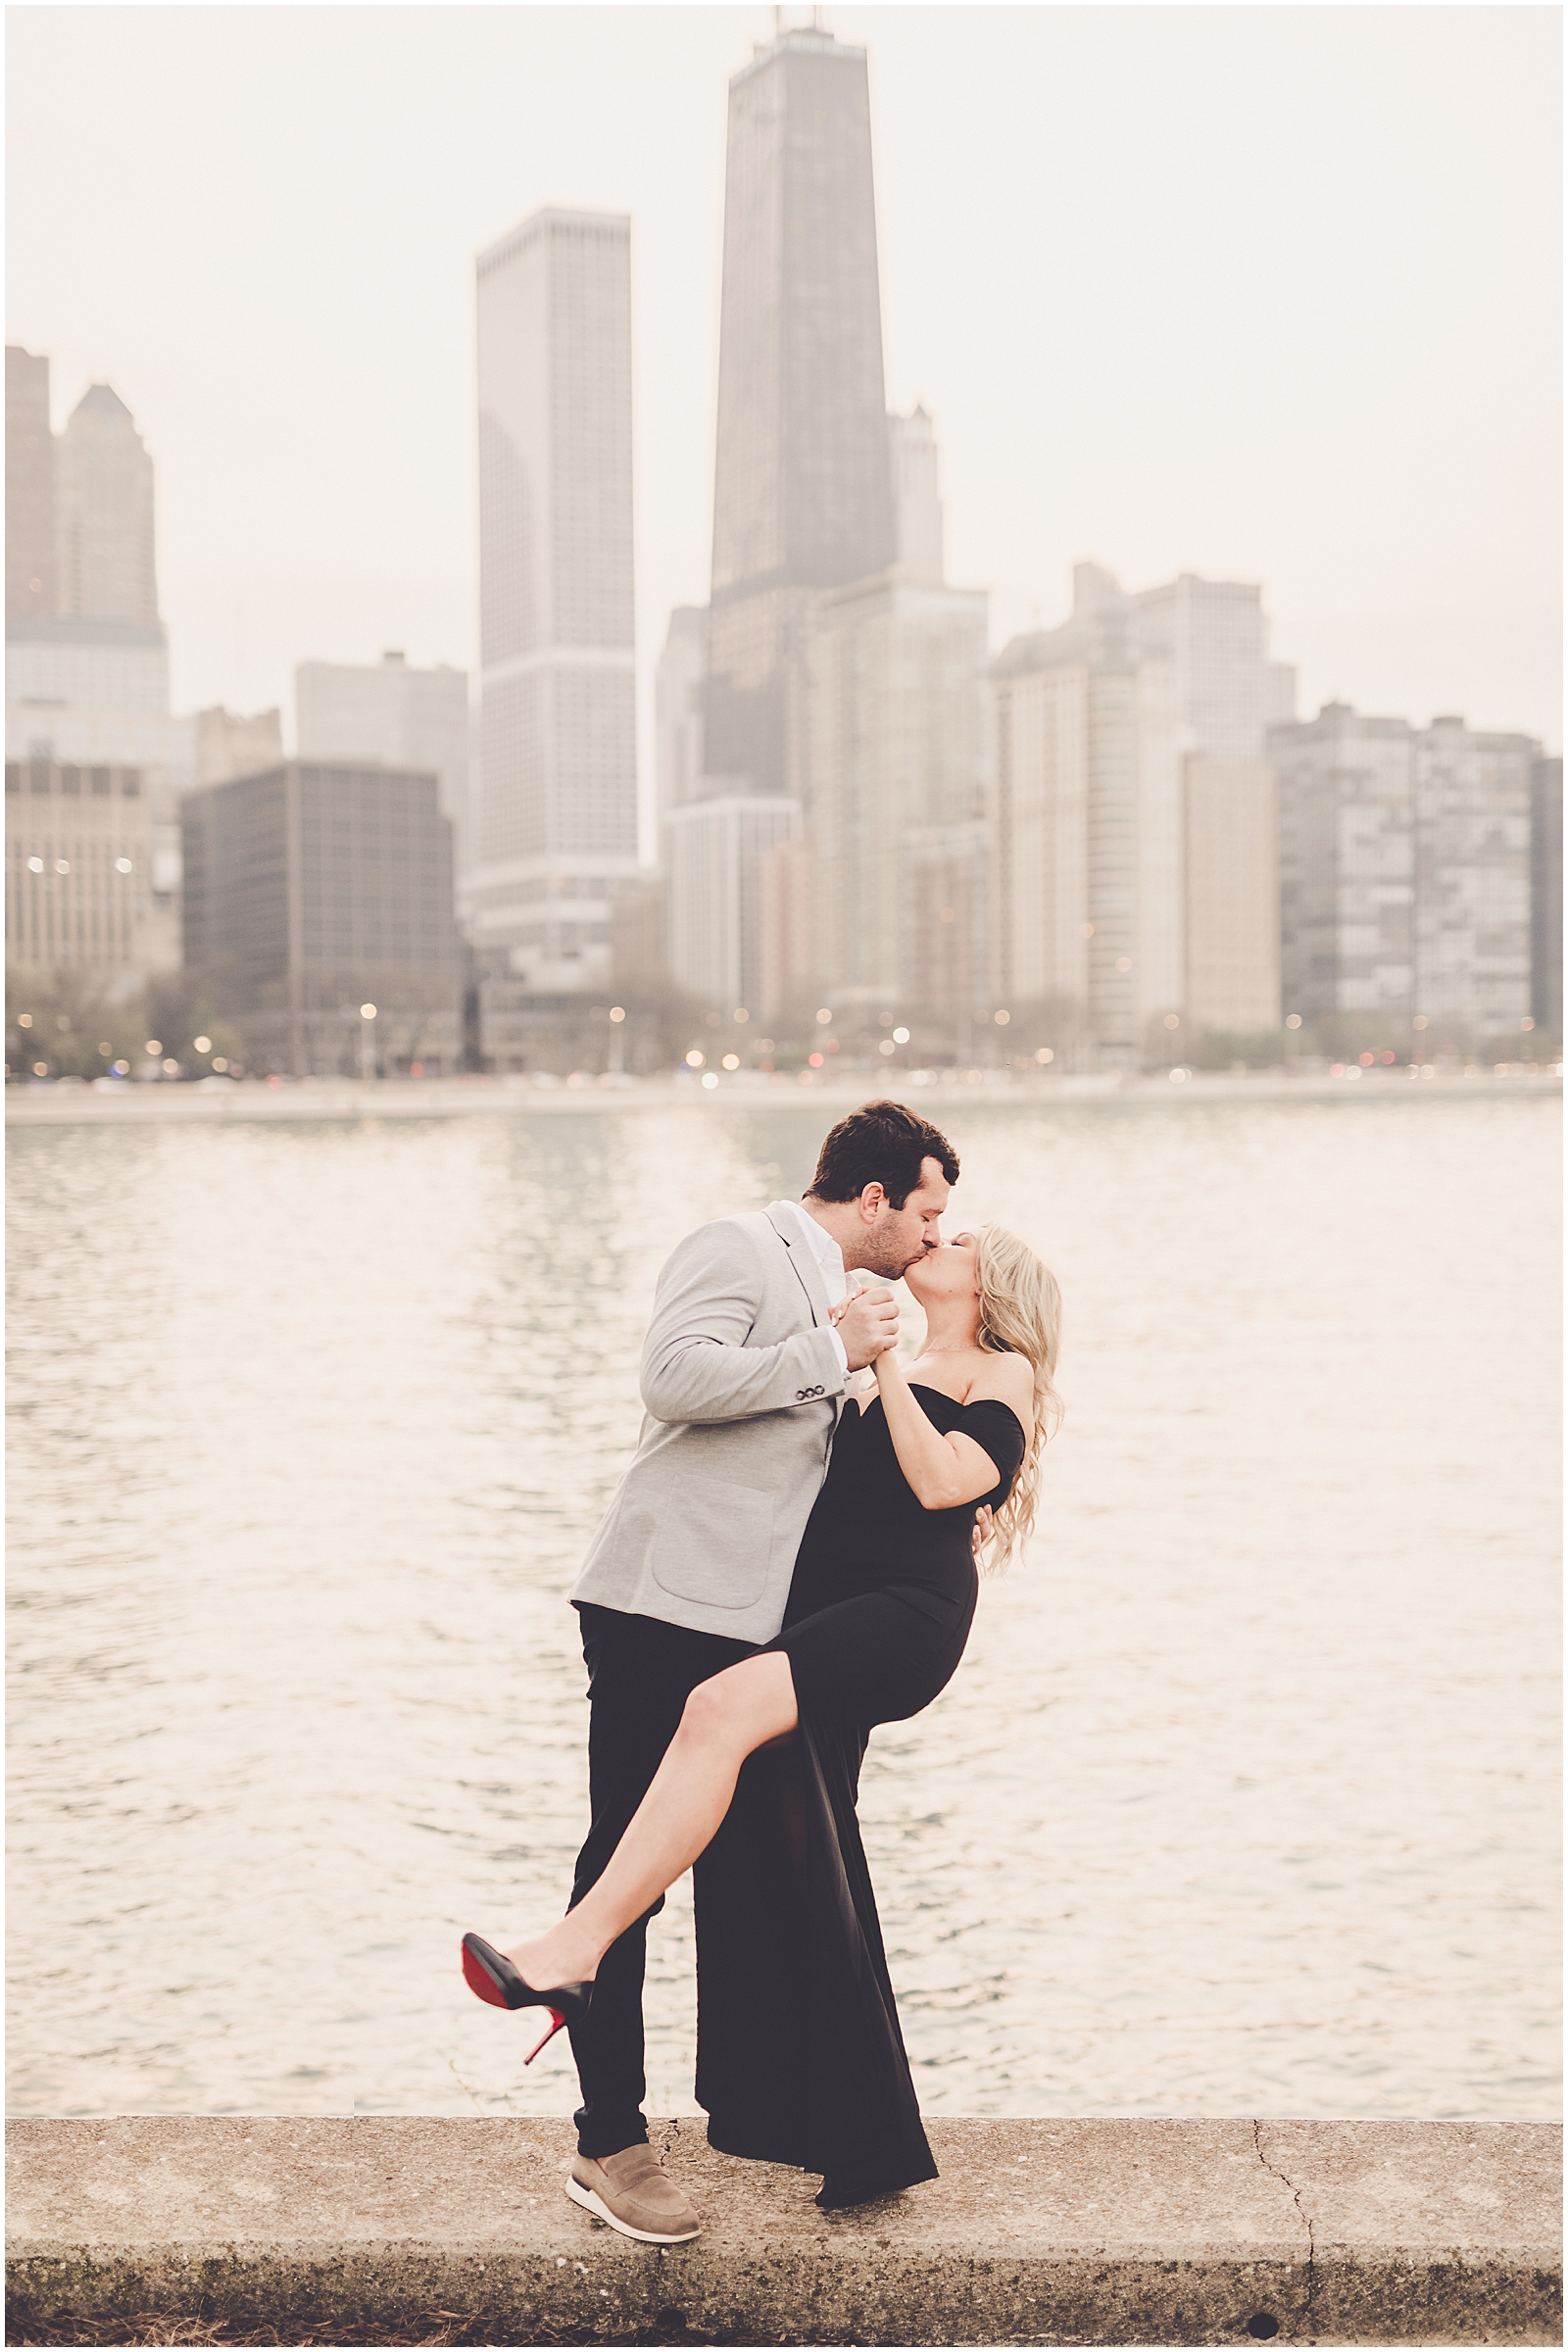 Shelby & Tim's riverwalk and Milton Lee Olive Park engagement photos in Chicago with Chicago wedding photographer Kara Evans Photographer.